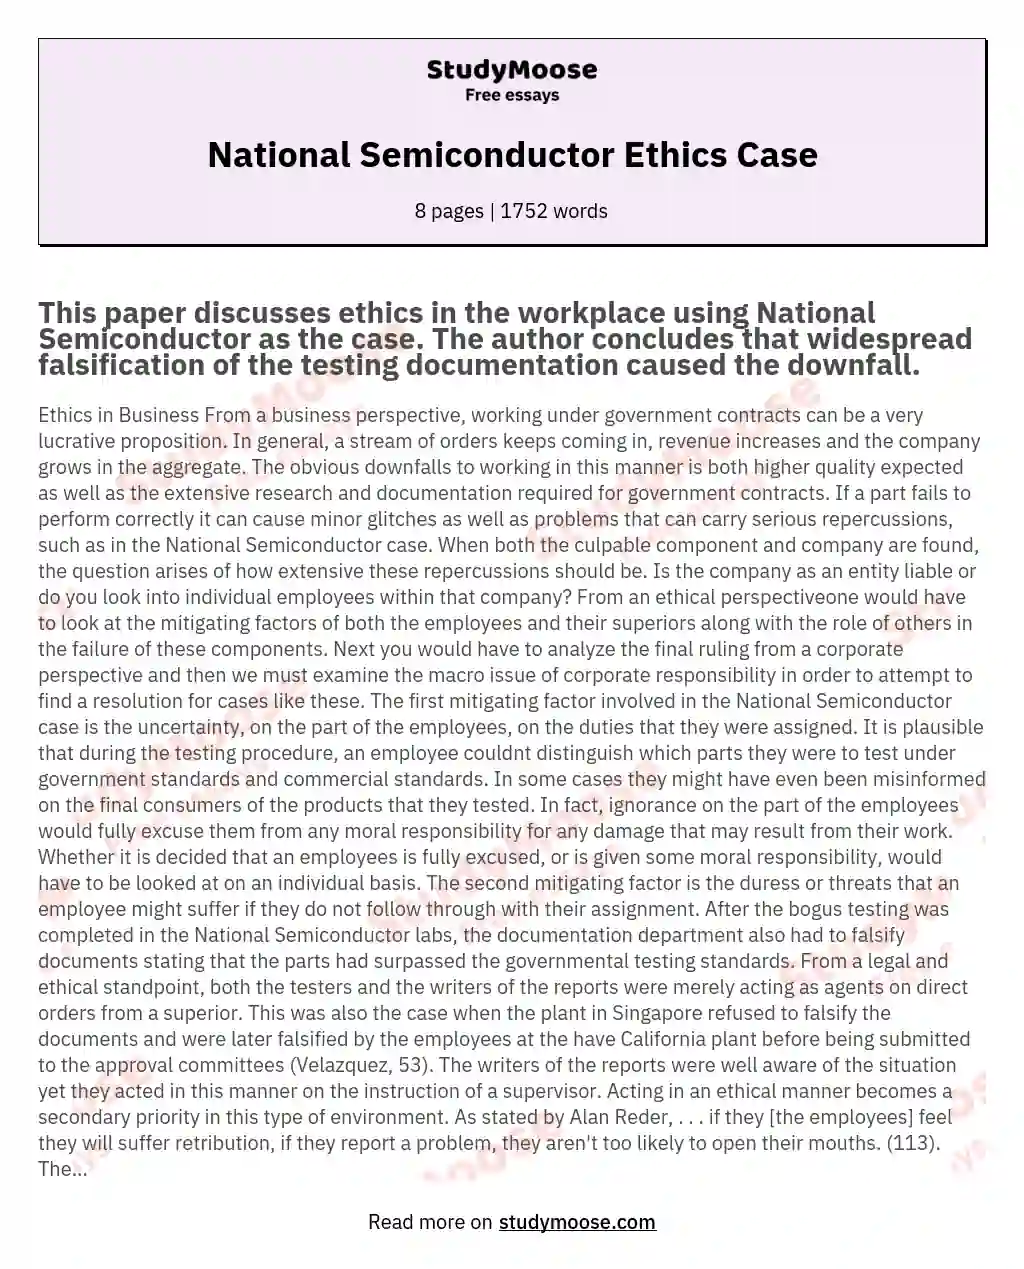 National Semiconductor Ethics Case essay